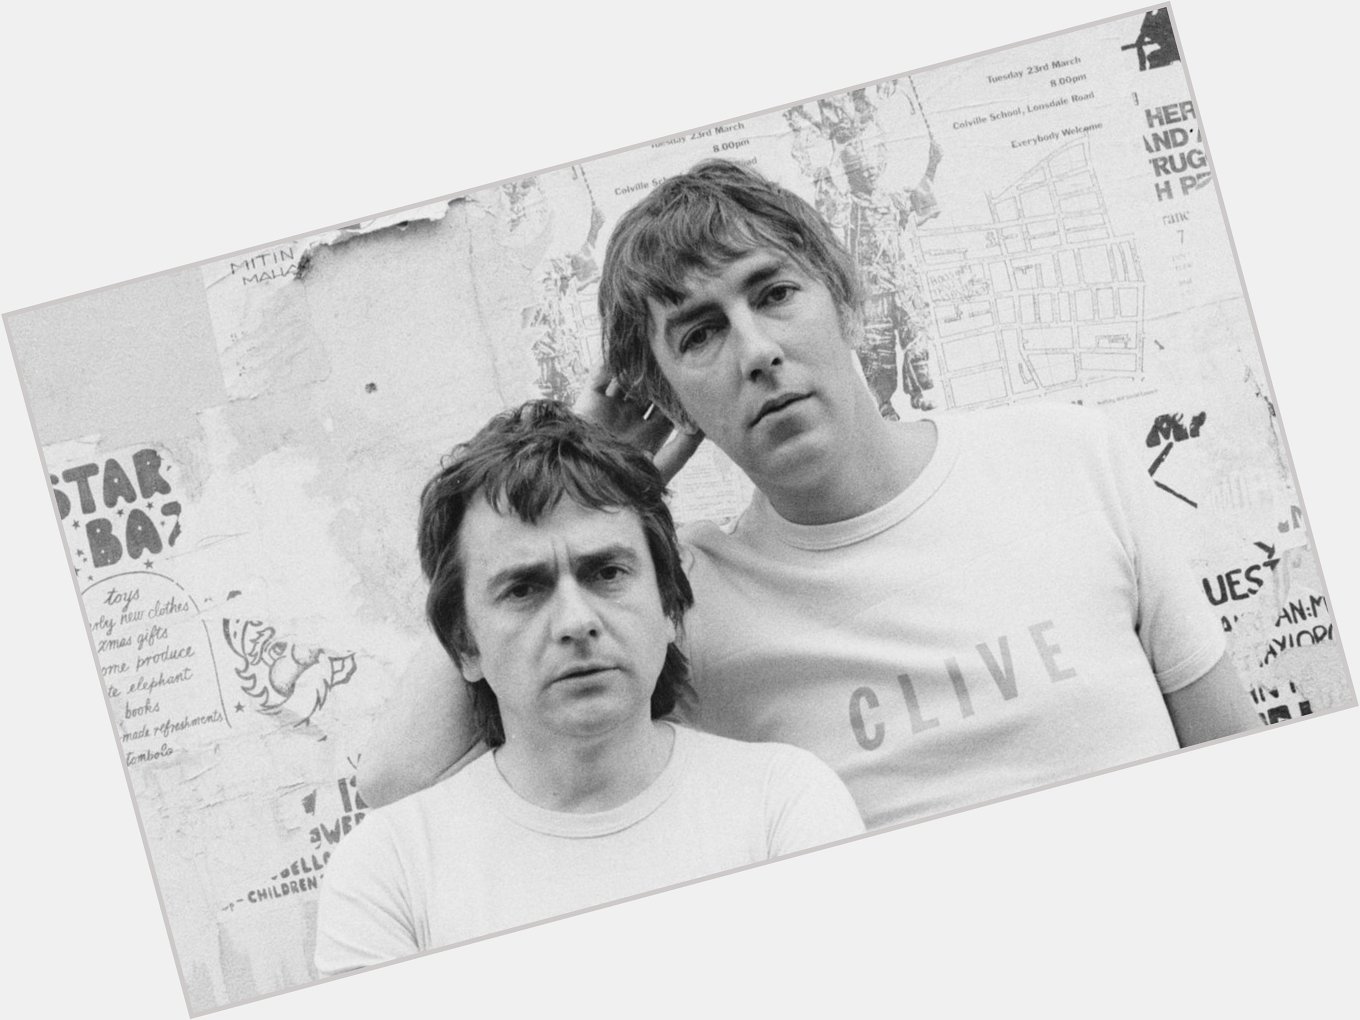 Happy birthday Peter Cook, he would have been 78 today. Here he is with Dudley Moore. 